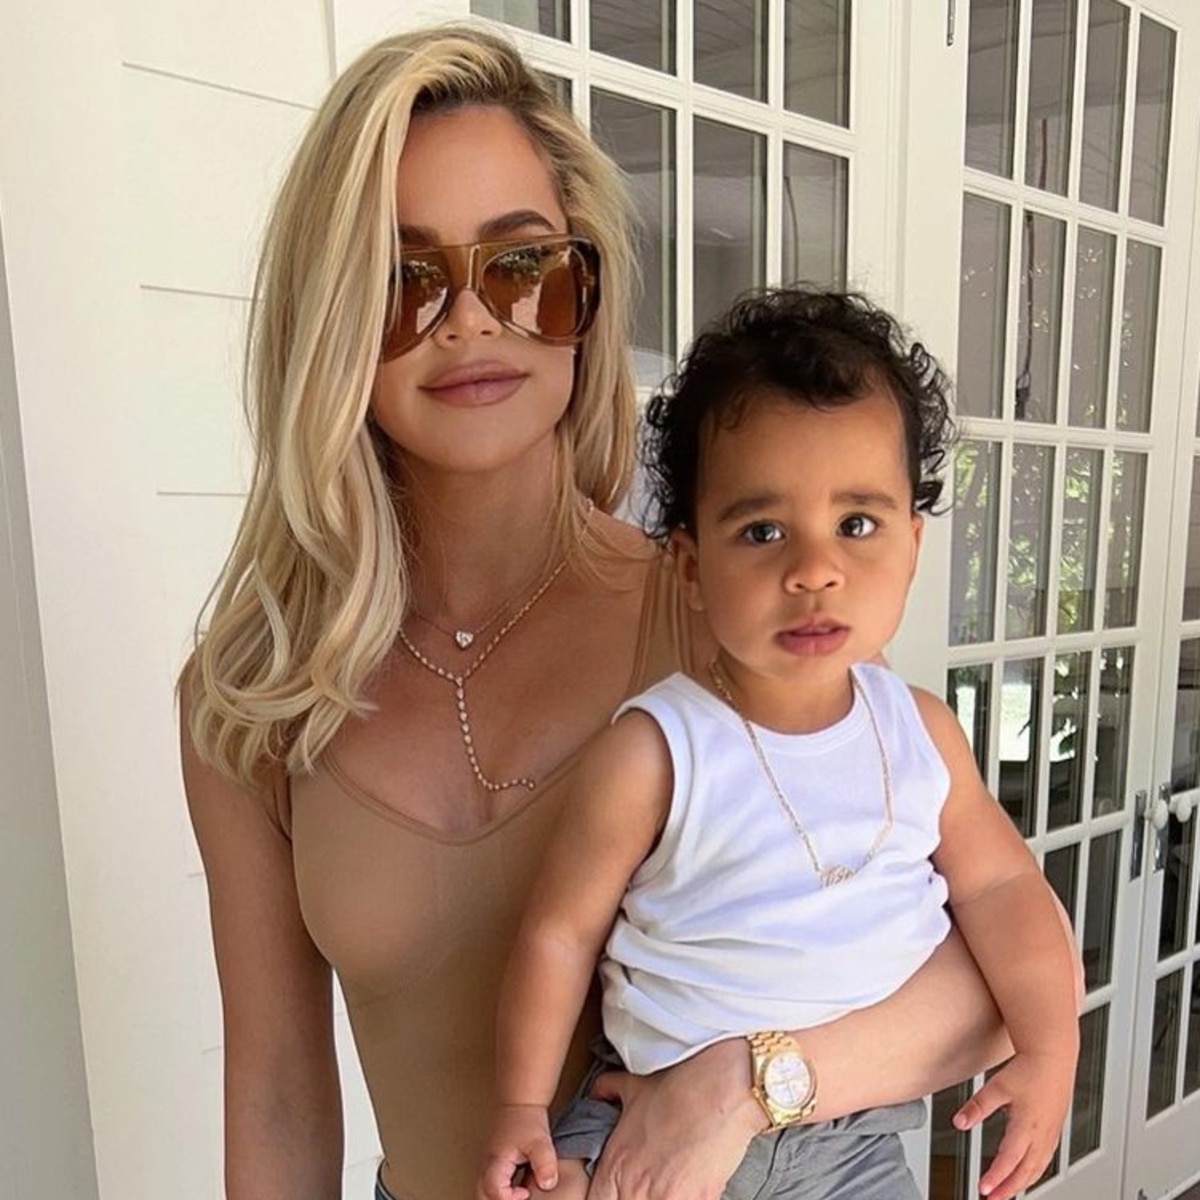 This New Glimpse of Khloe Kardashian's Son Tatum May Be the Cutest Yet